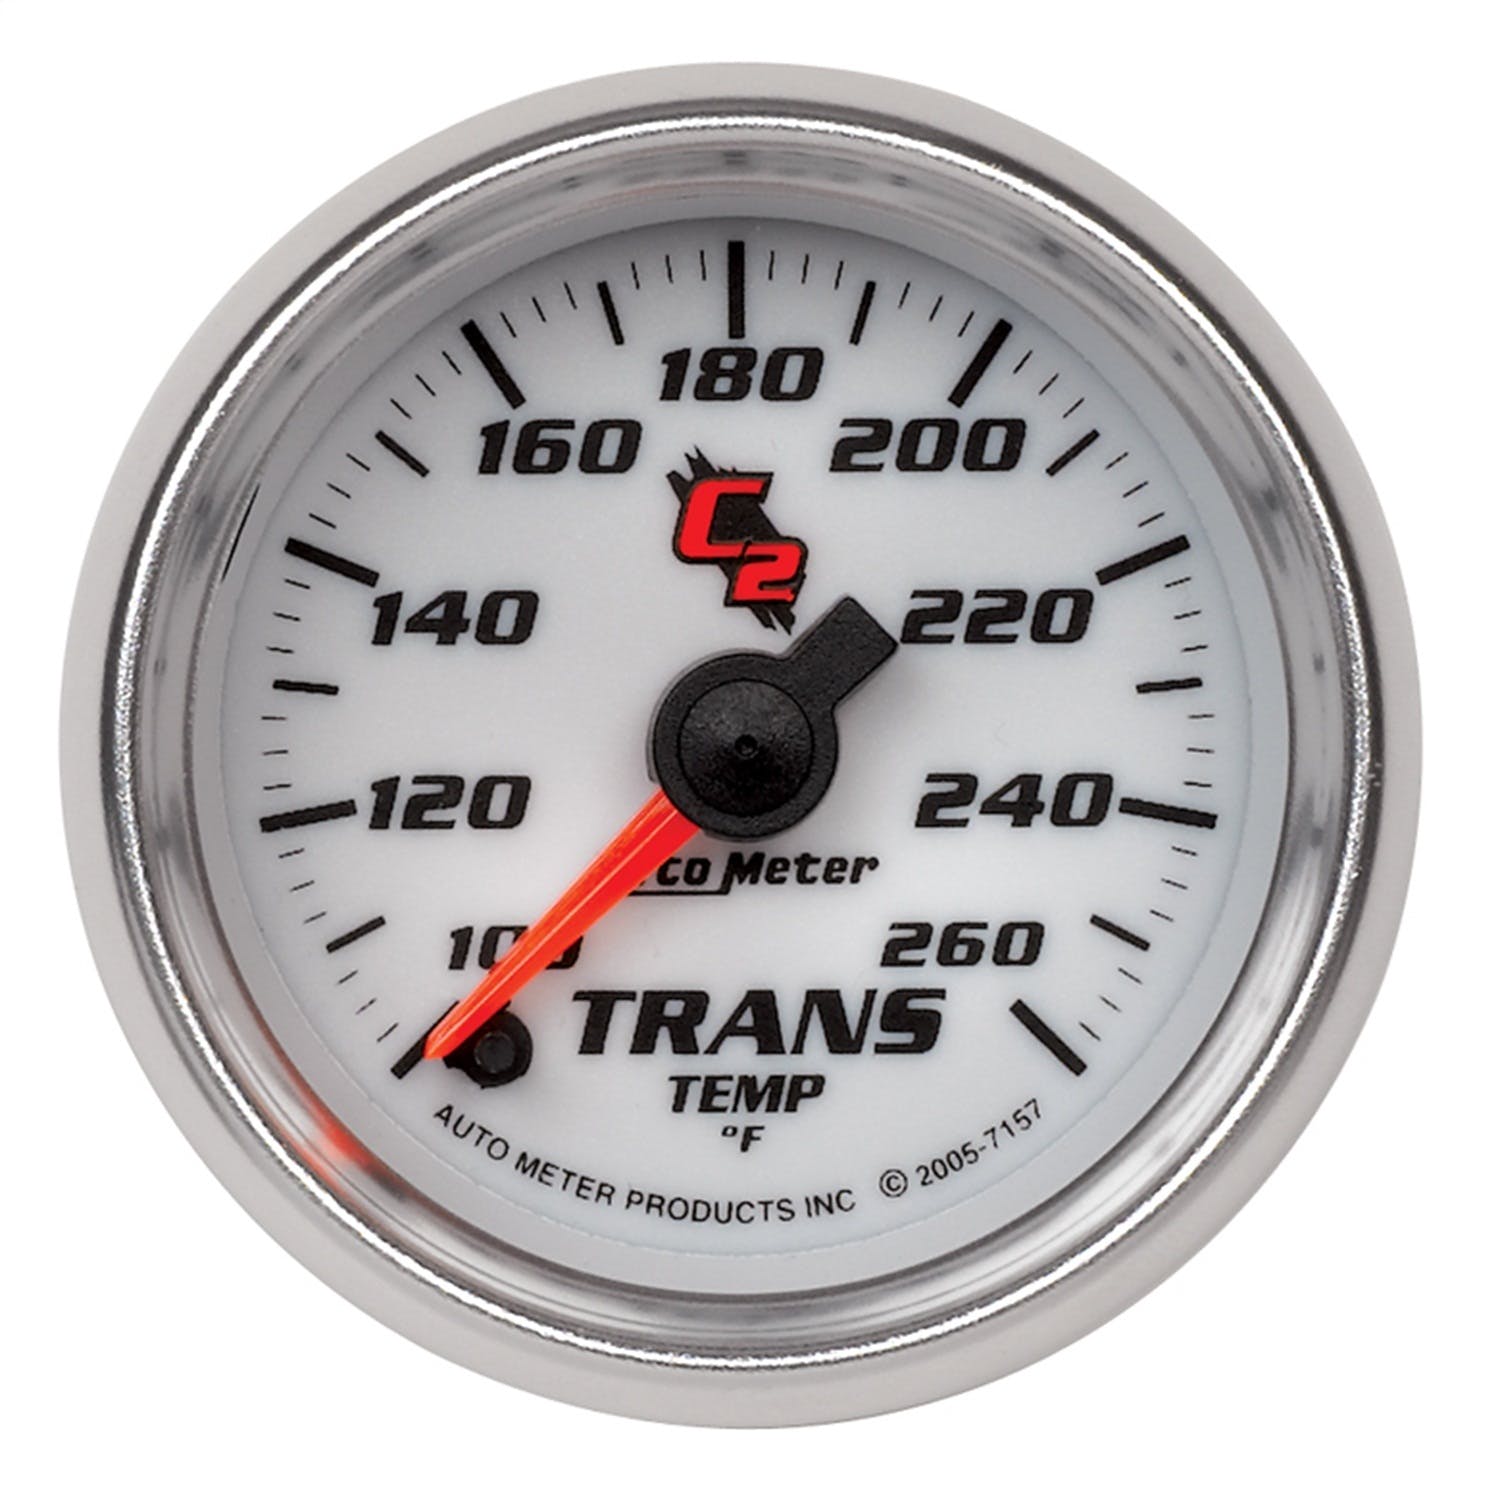 AutoMeter Products 7157 Trans Temp 100-260 F